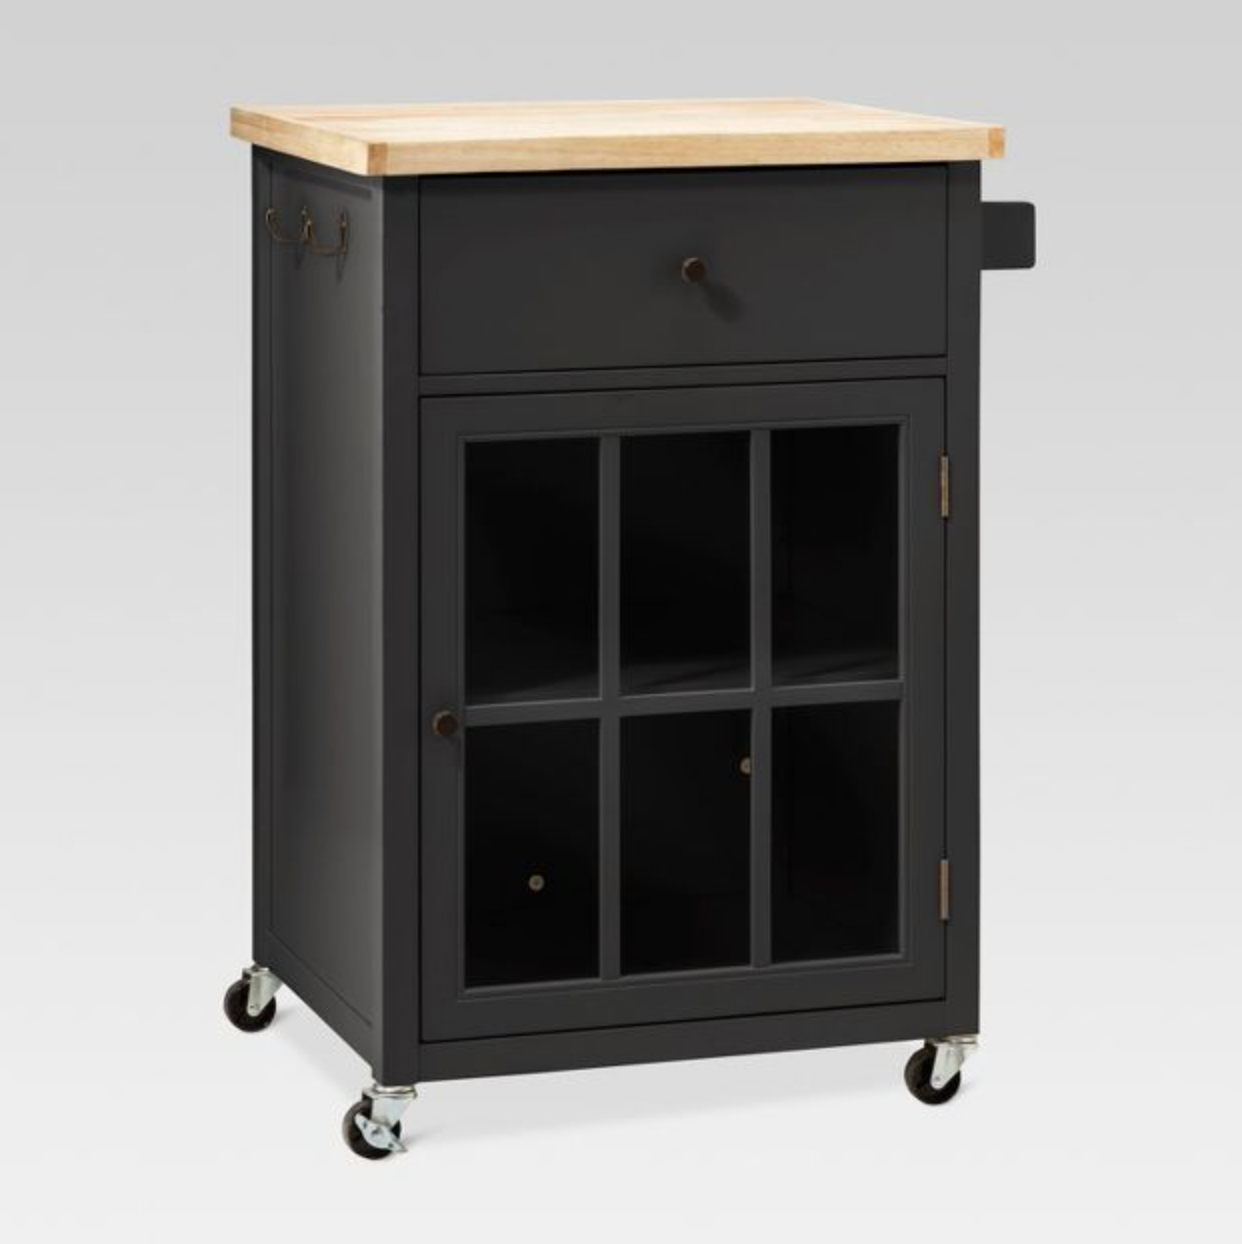 Black and light wooden microwave cart with side hooks and cabinet door and drawer on a white background